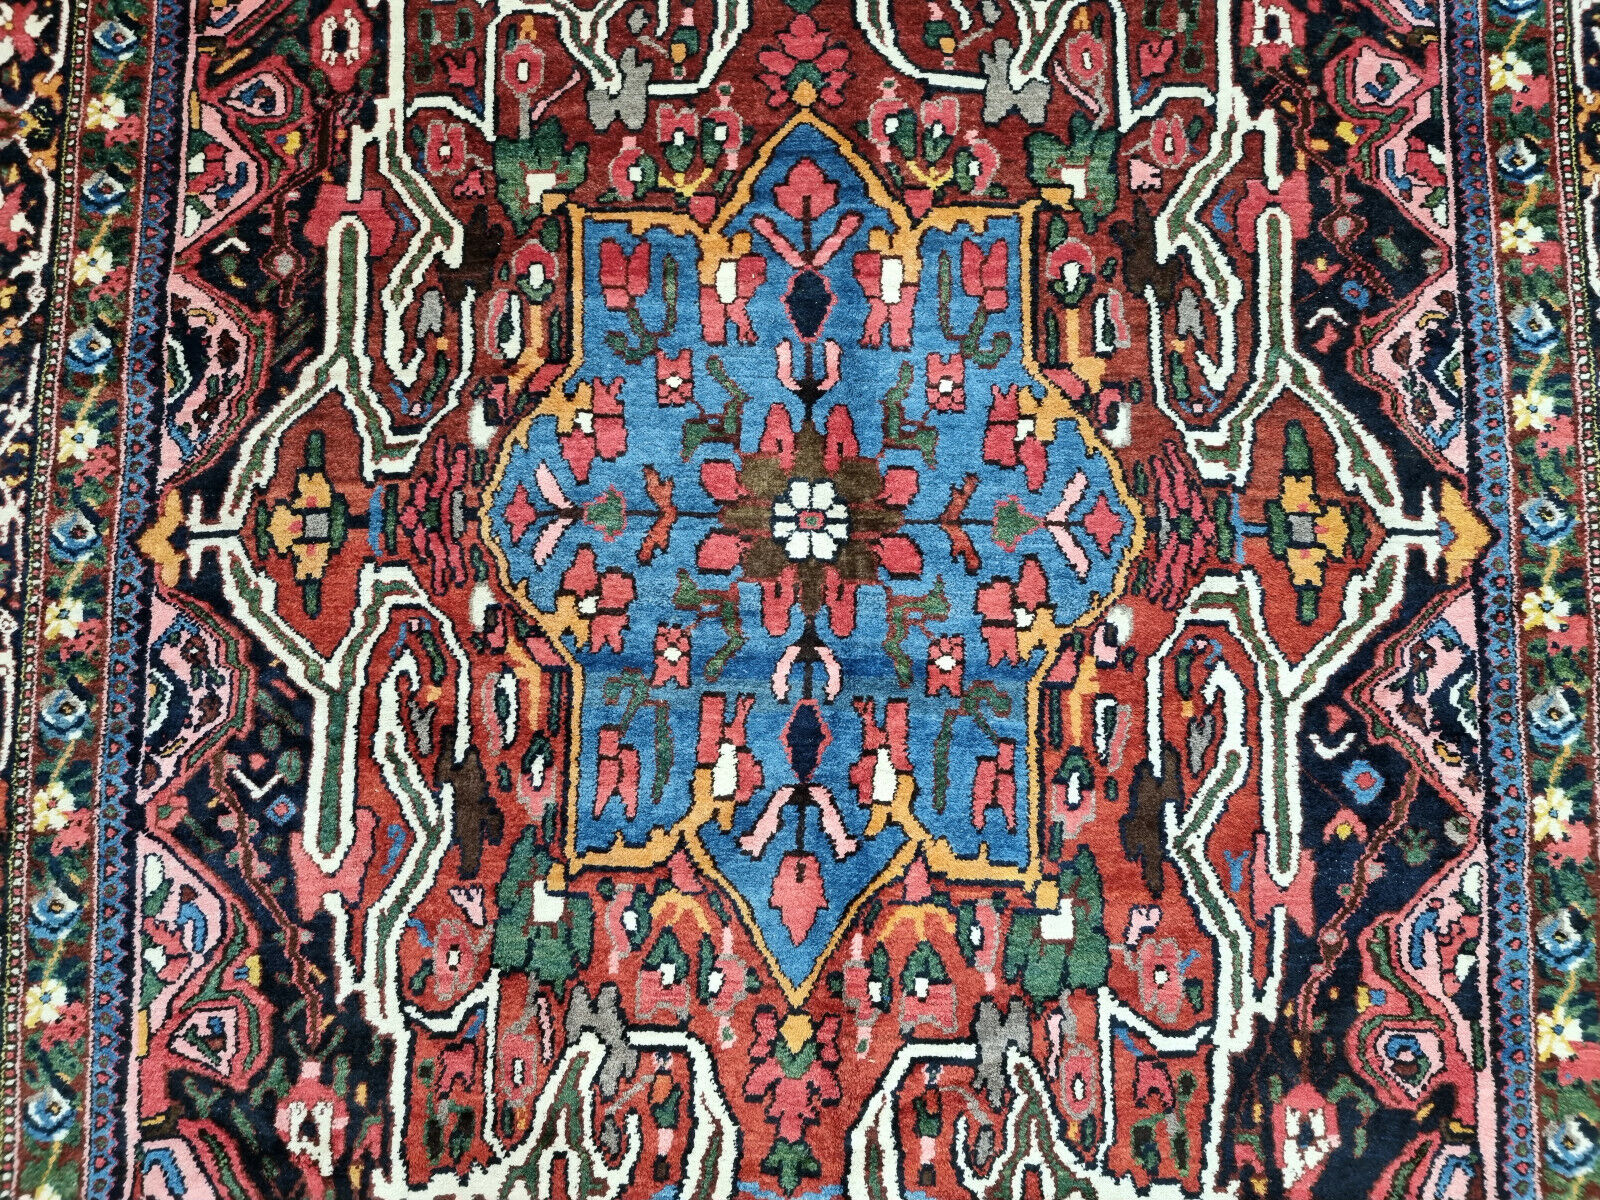 Close-up of intricate floral patterns on Handmade Antique Persian Bakhtiari Rug - Detailed view highlighting the intricate floral patterns woven into the rug.